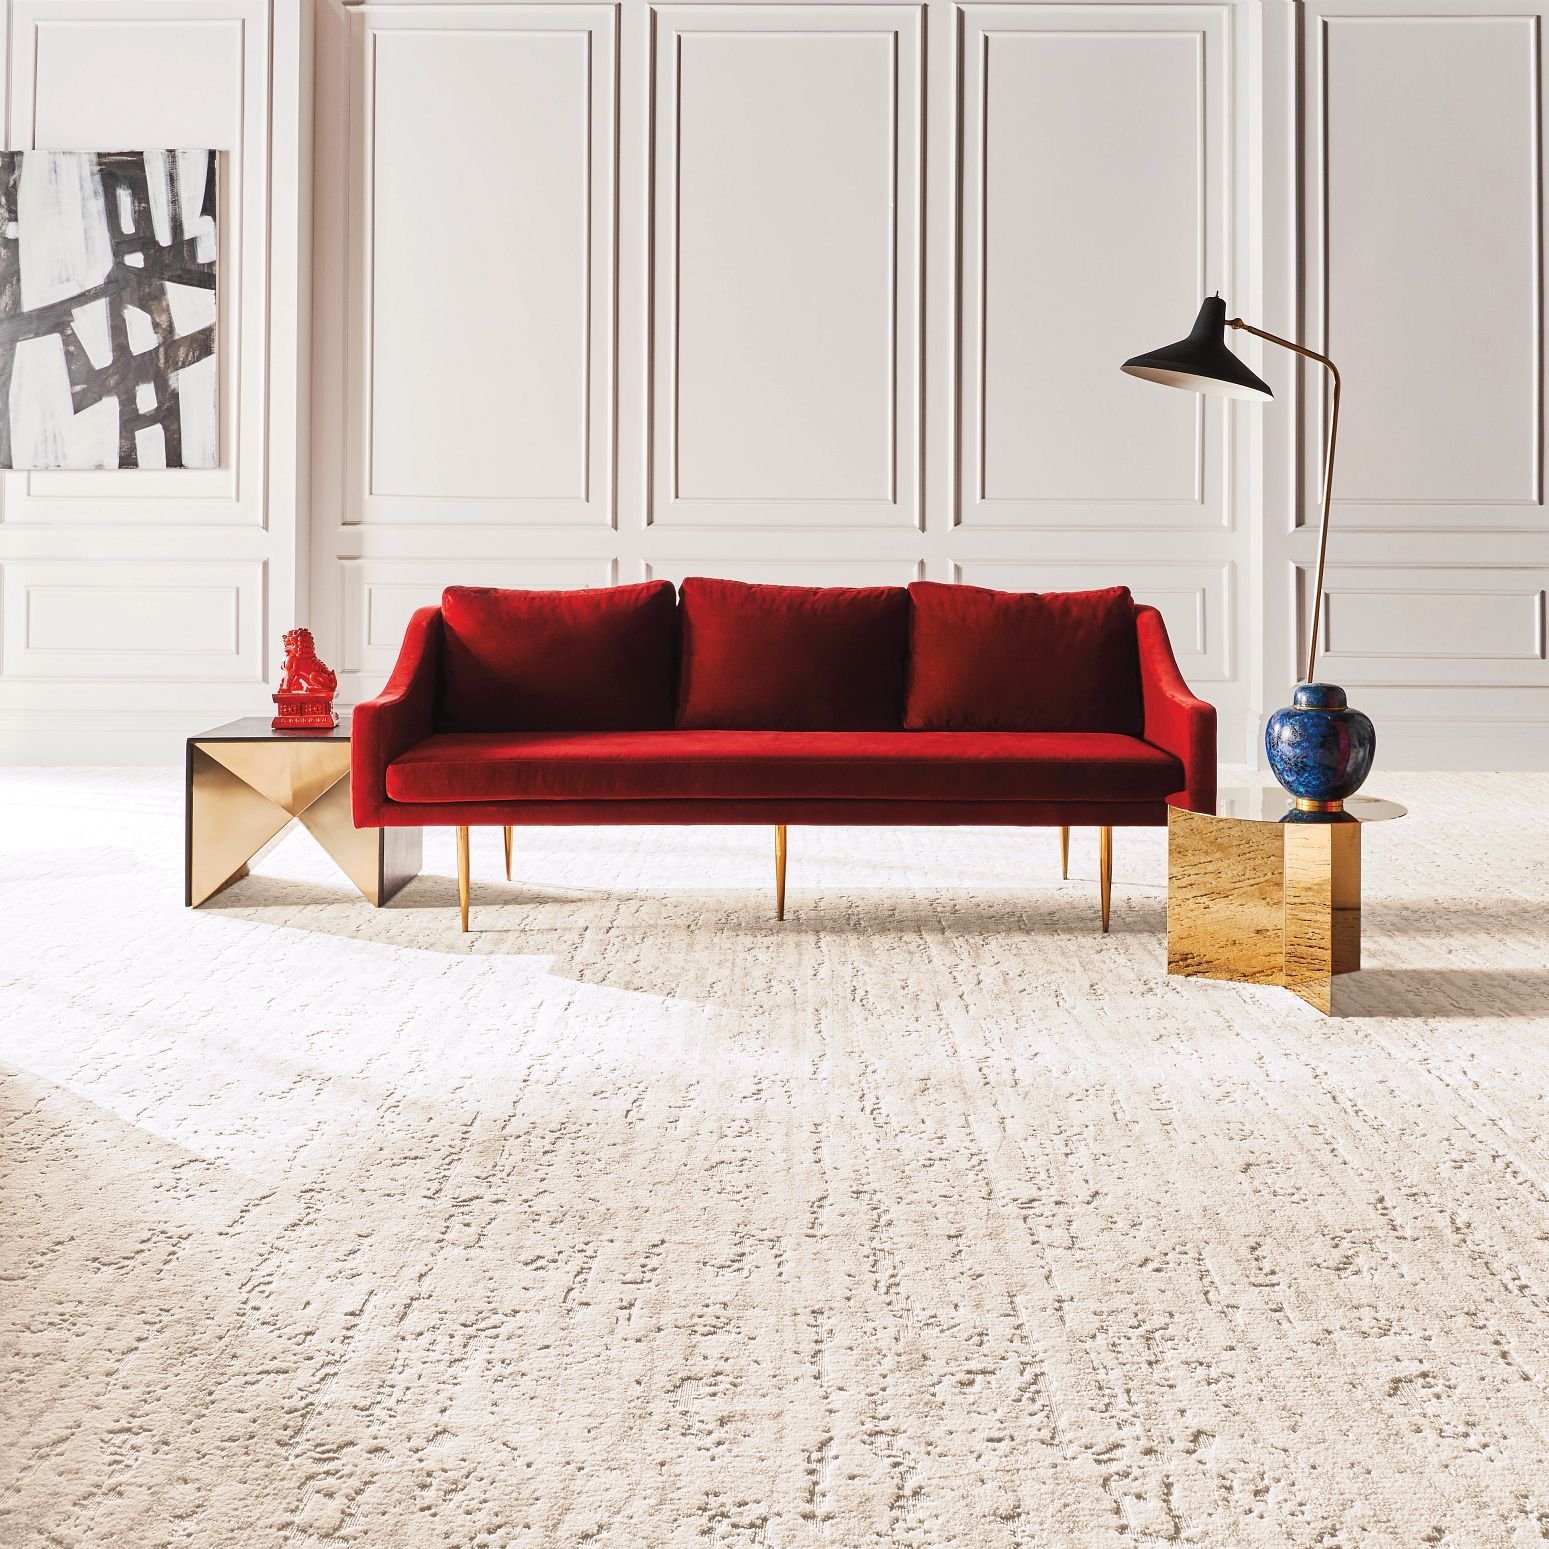 Red couch on carpet from Carpet World Flooring in Canyon